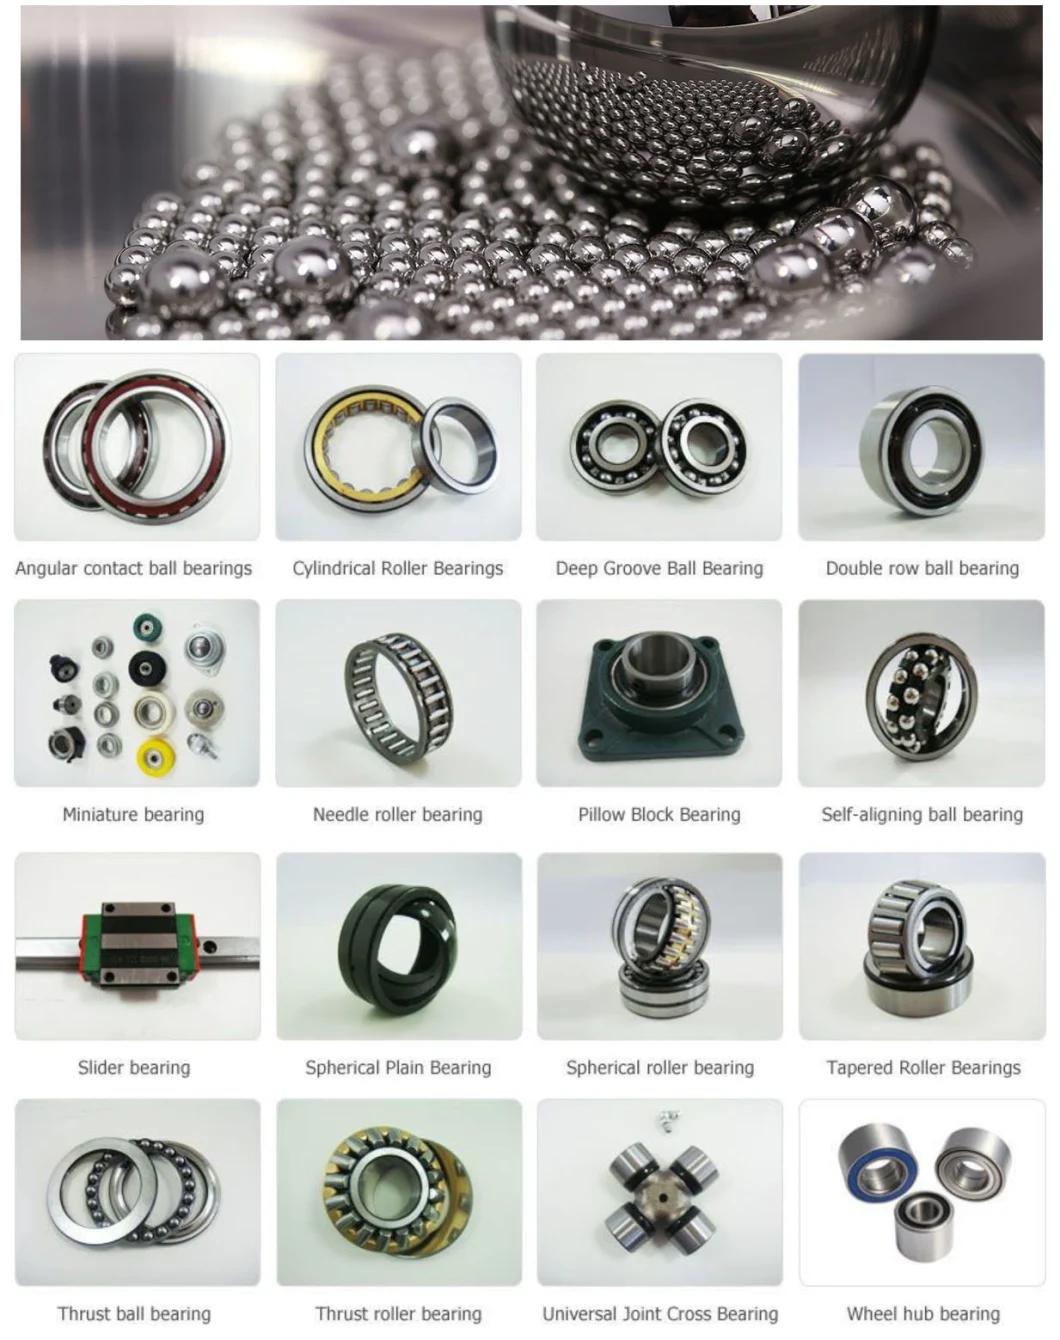 Made of Chrome Steel and Stainless Steel, Carbon Steel Ball